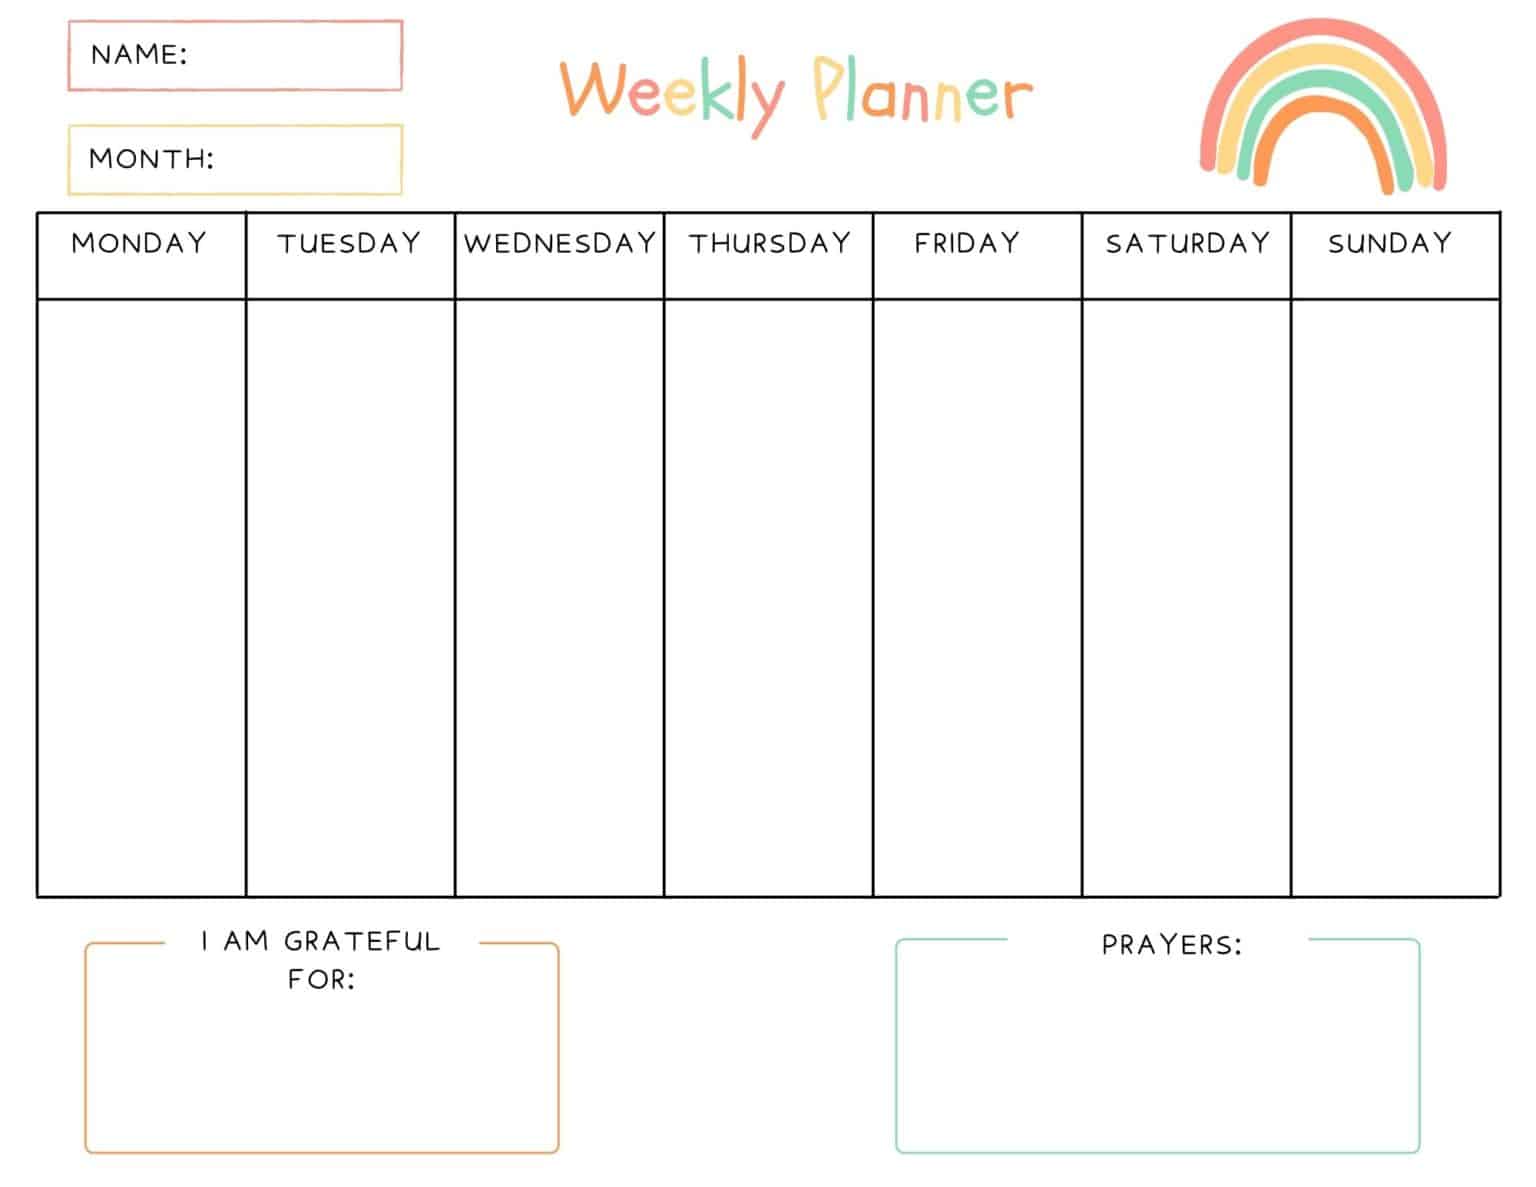 Free Weekly Planner For Kids With Prayers Gratitude Out Upon The